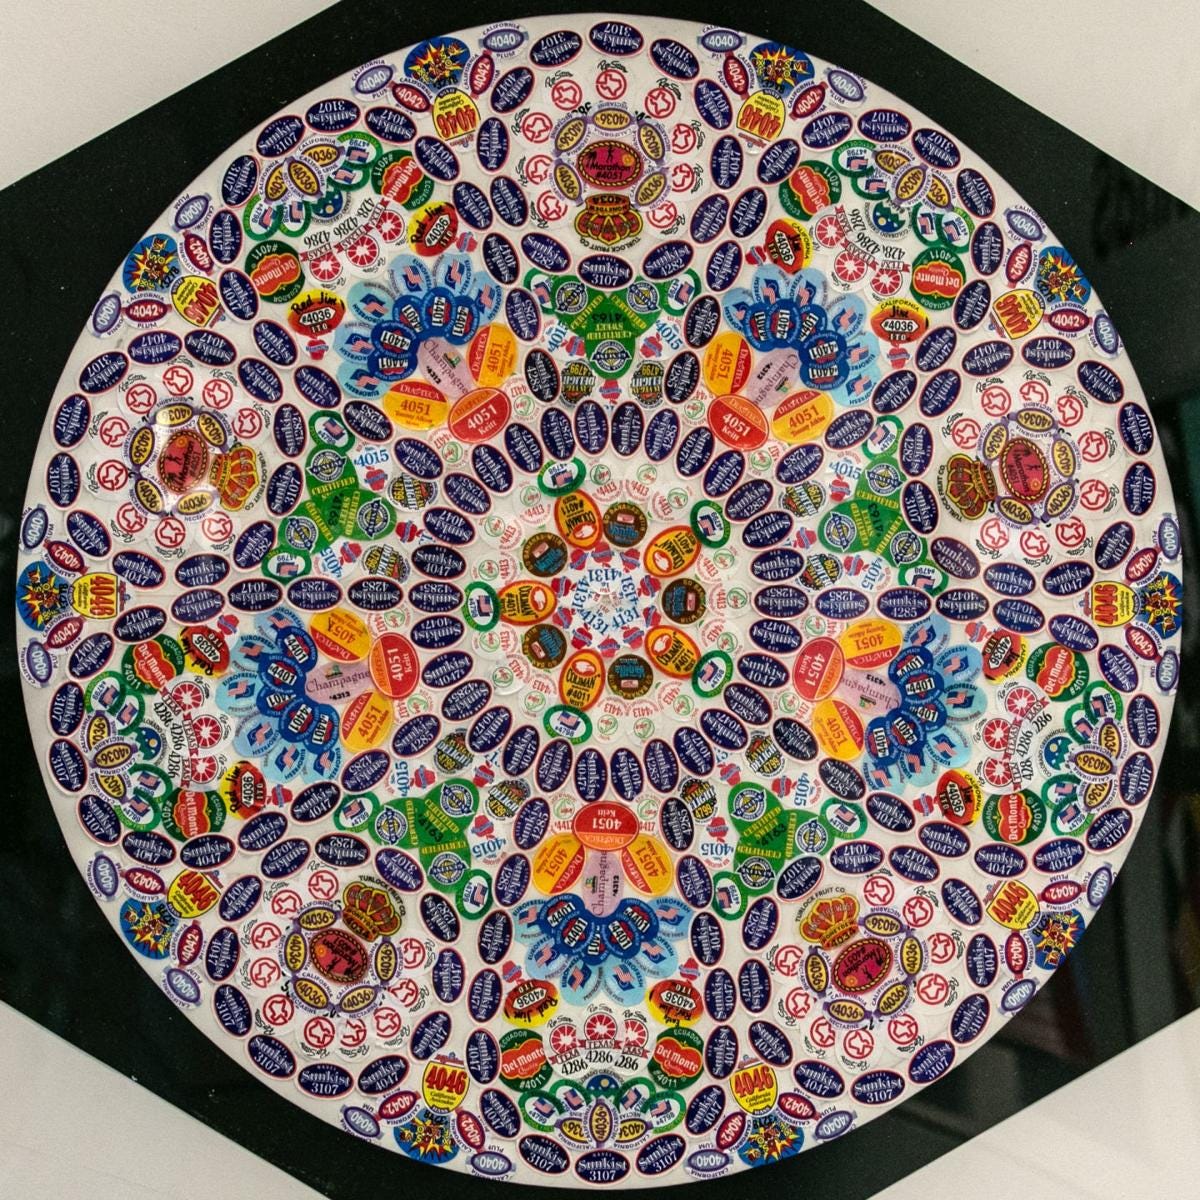 A circular, mandala-like collage made from fruit stickers that resembles a church window.